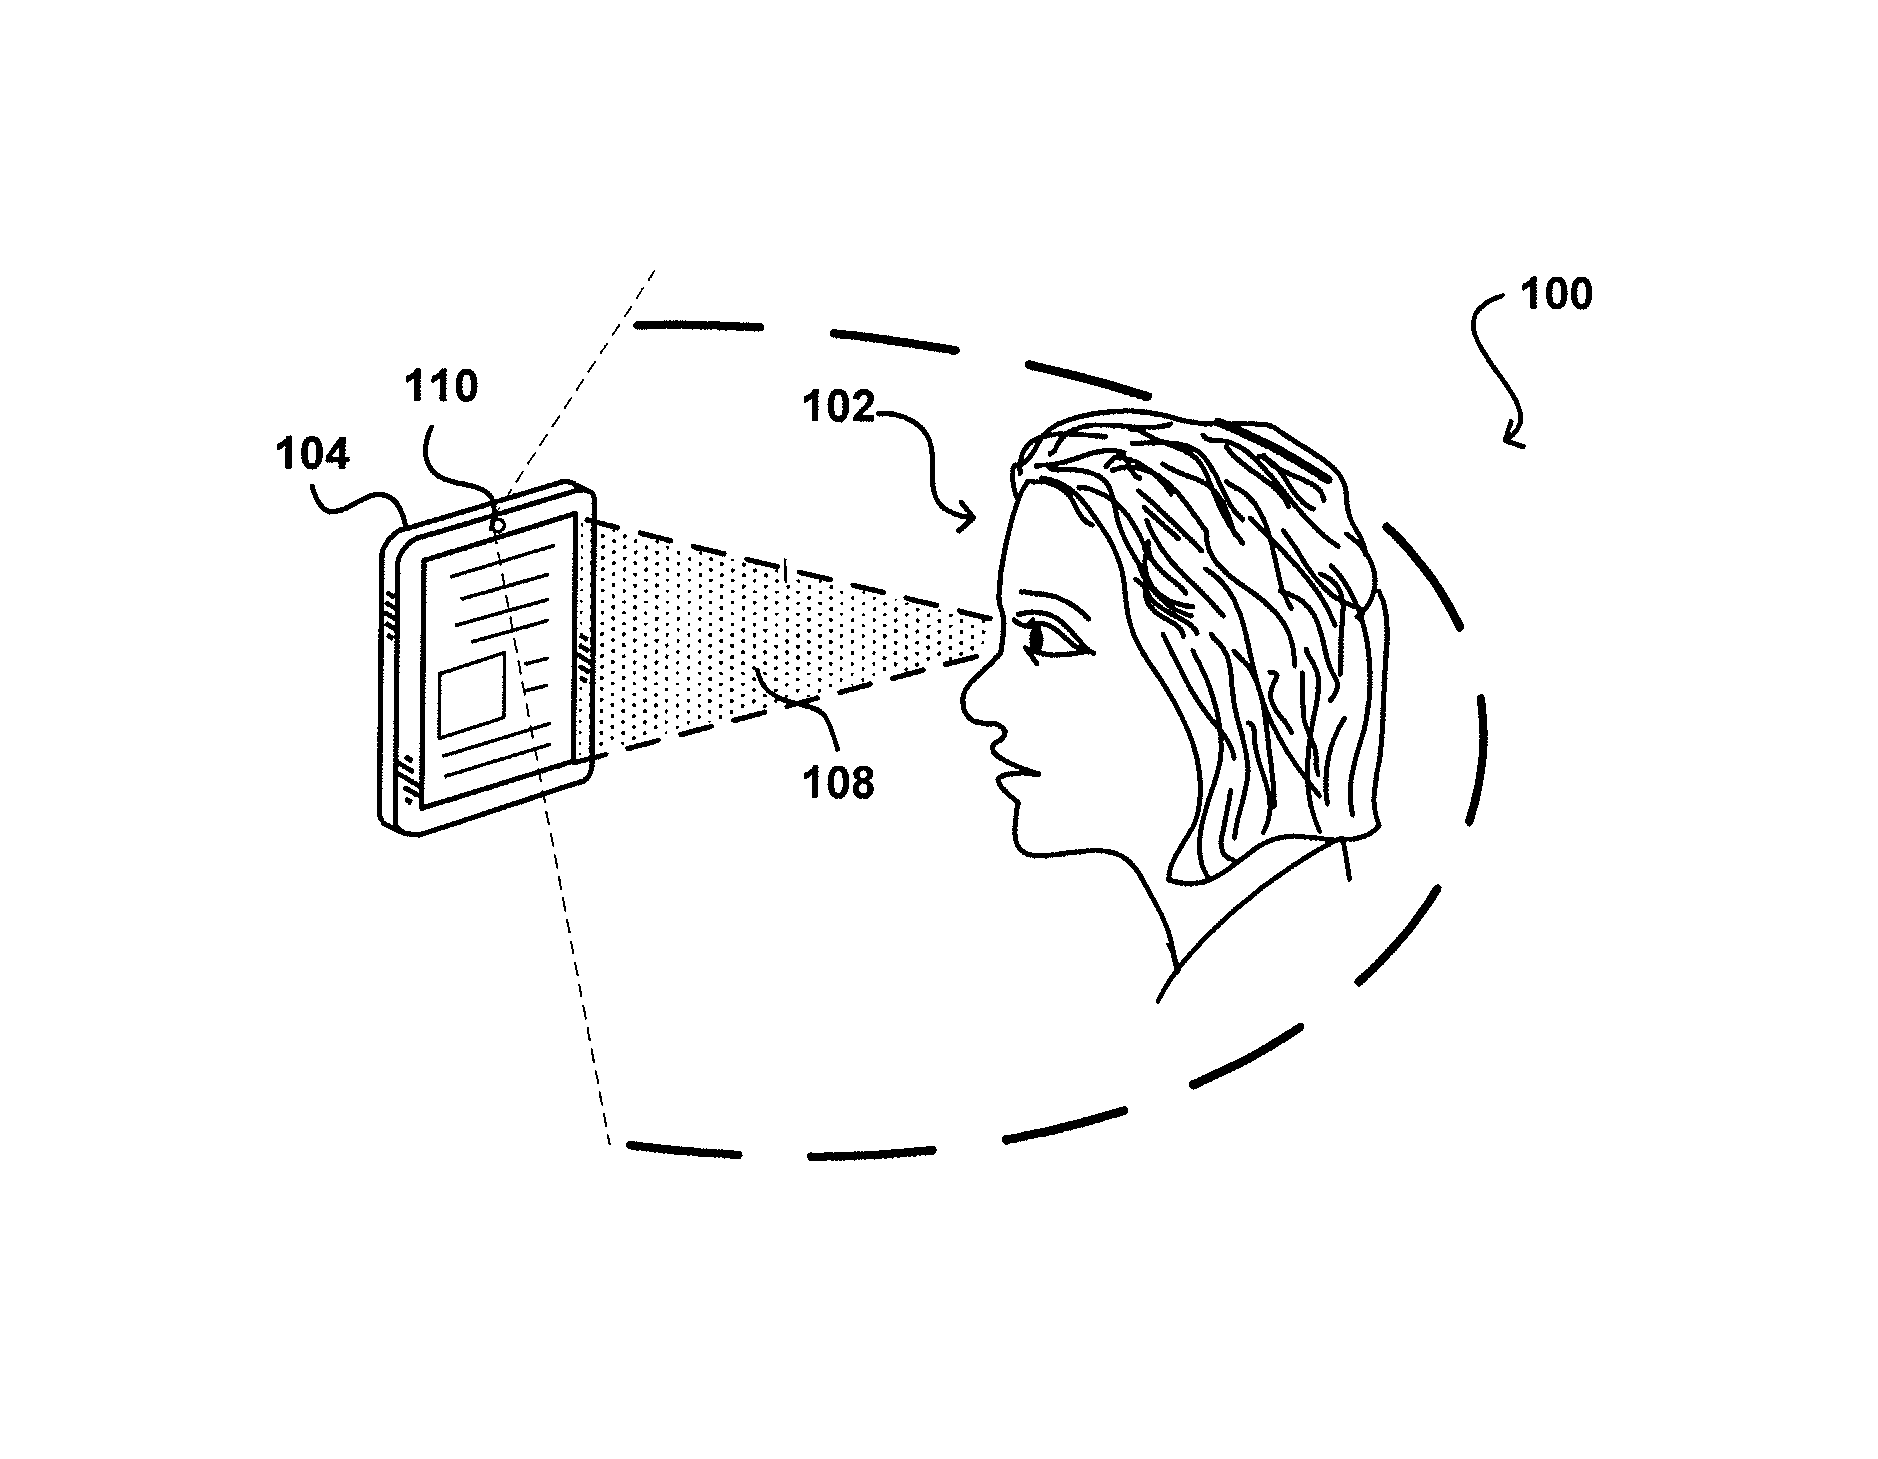 Dynamic device adjustments based on determined user sleep state